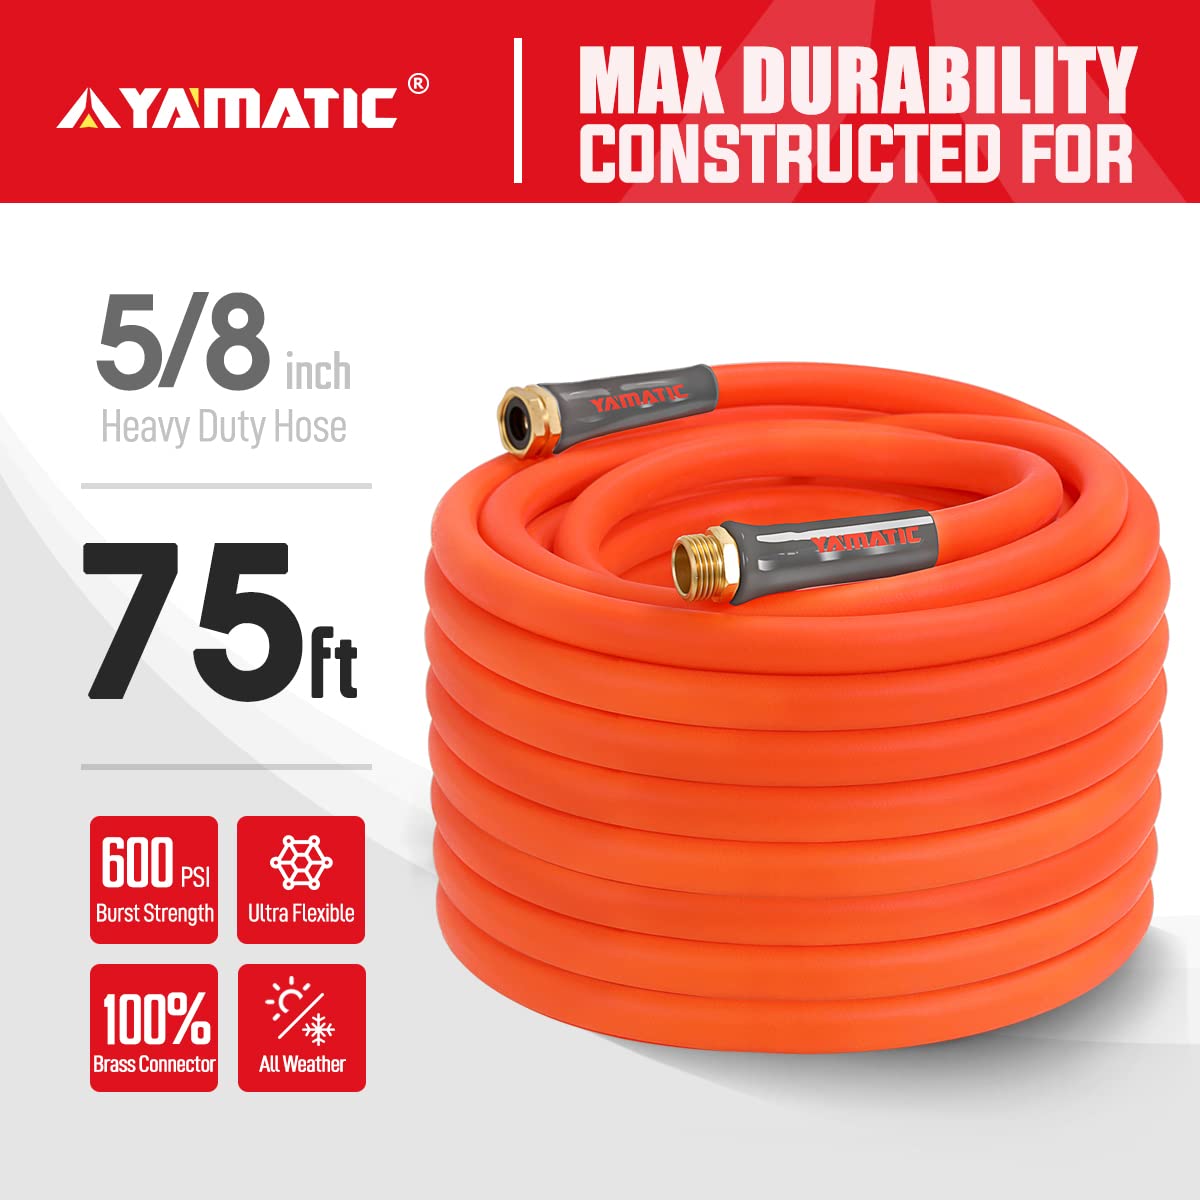 YAMATIC Heavy Duty Garden Hose 5/8 in x 75 ft, Super Flexible Water Hose, All-weather, Lightweight, Burst 600 PSI GHSE 5P75AH-WFS-A